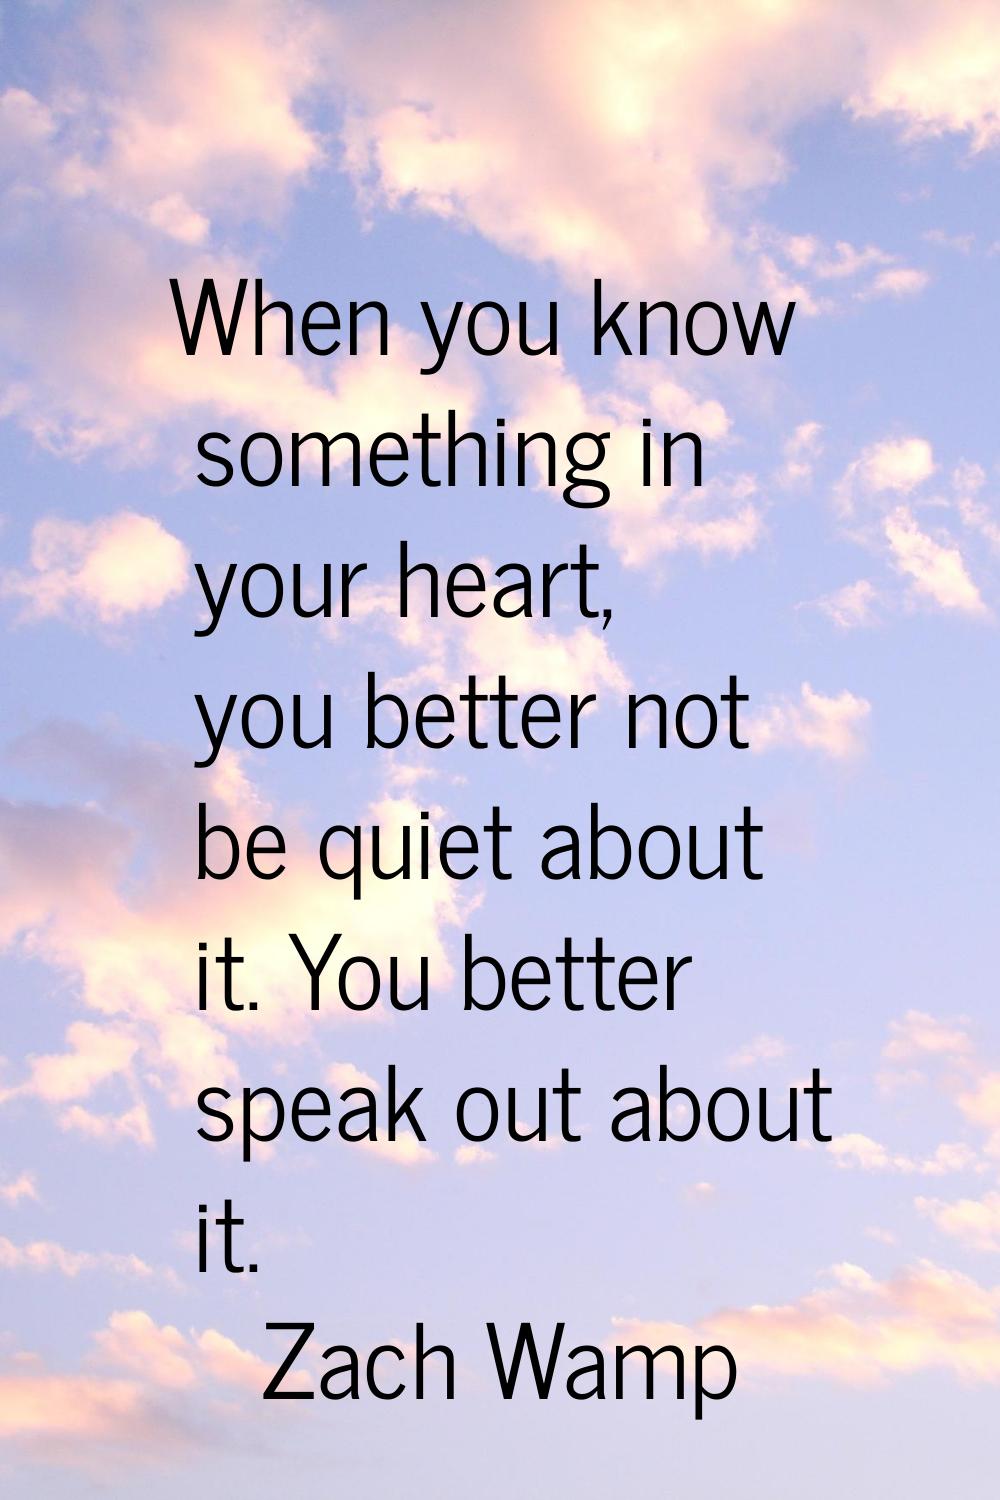 When you know something in your heart, you better not be quiet about it. You better speak out about